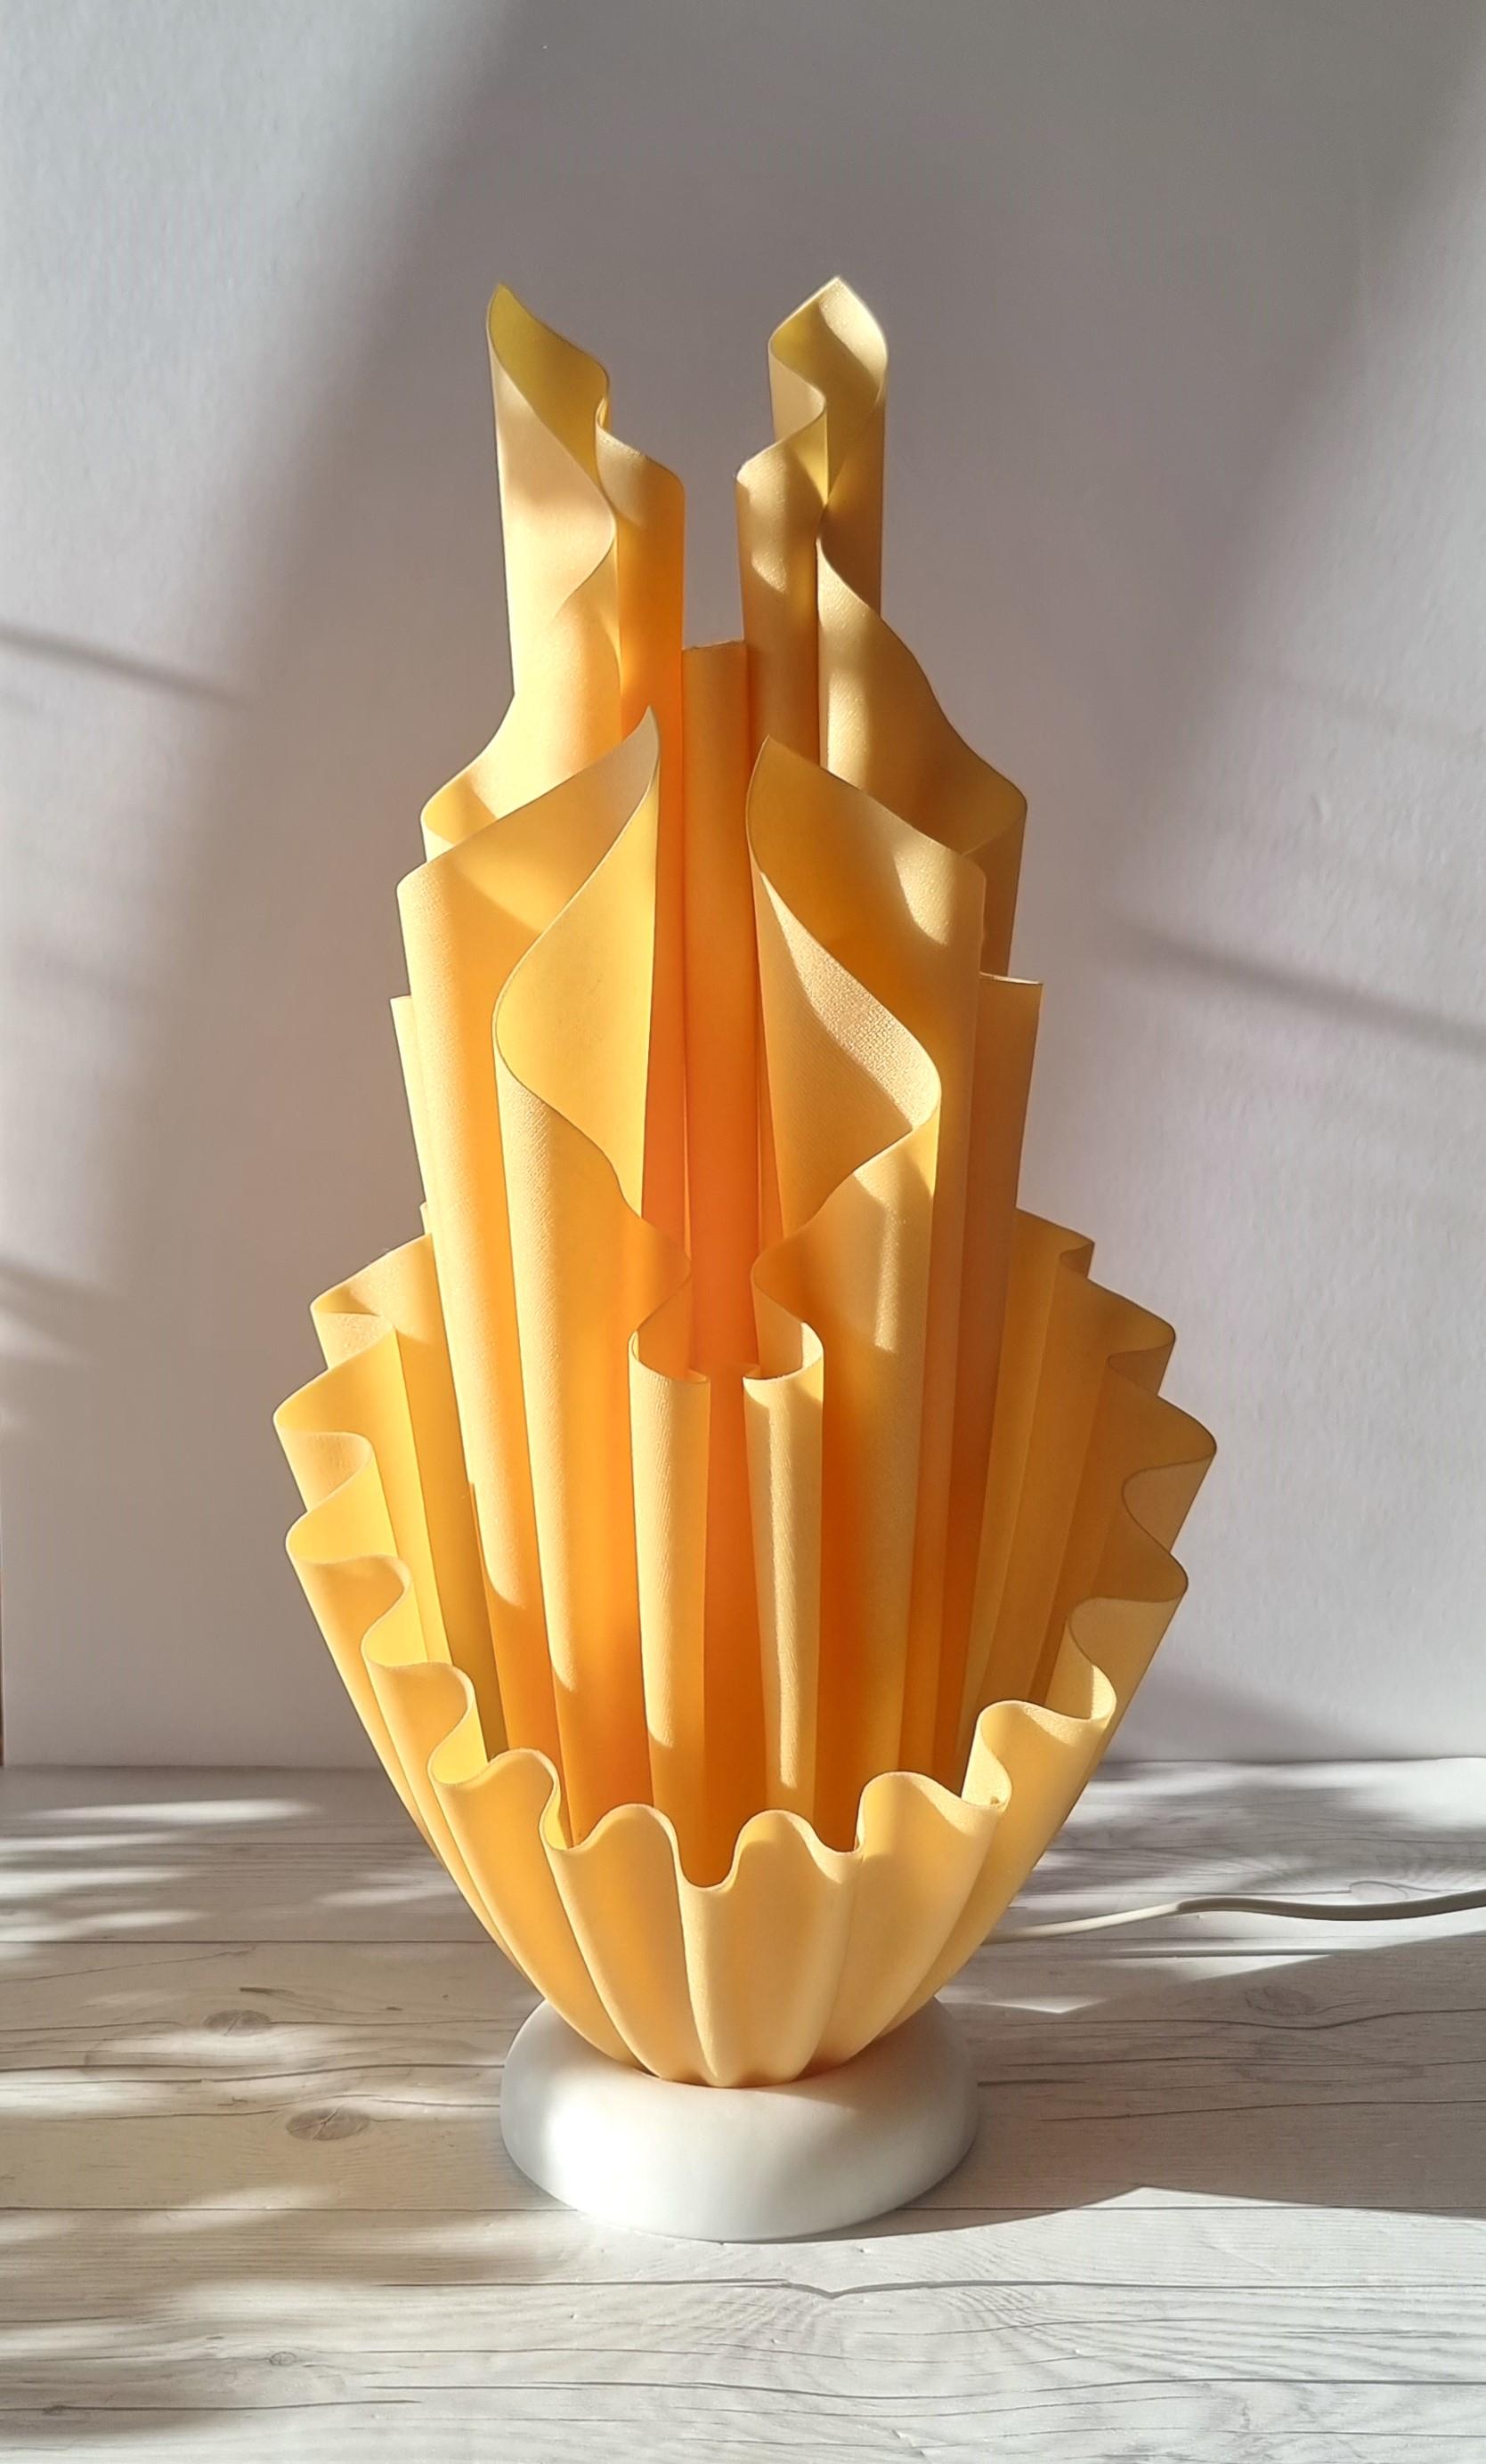 This majestically sculptural lamp is of French design by Georgia Jacob's company (1988 - 2012). This particular piece comes from the Corolle series, one of many series where Jacob explored shape and form exclusively through the arrangement of drape.